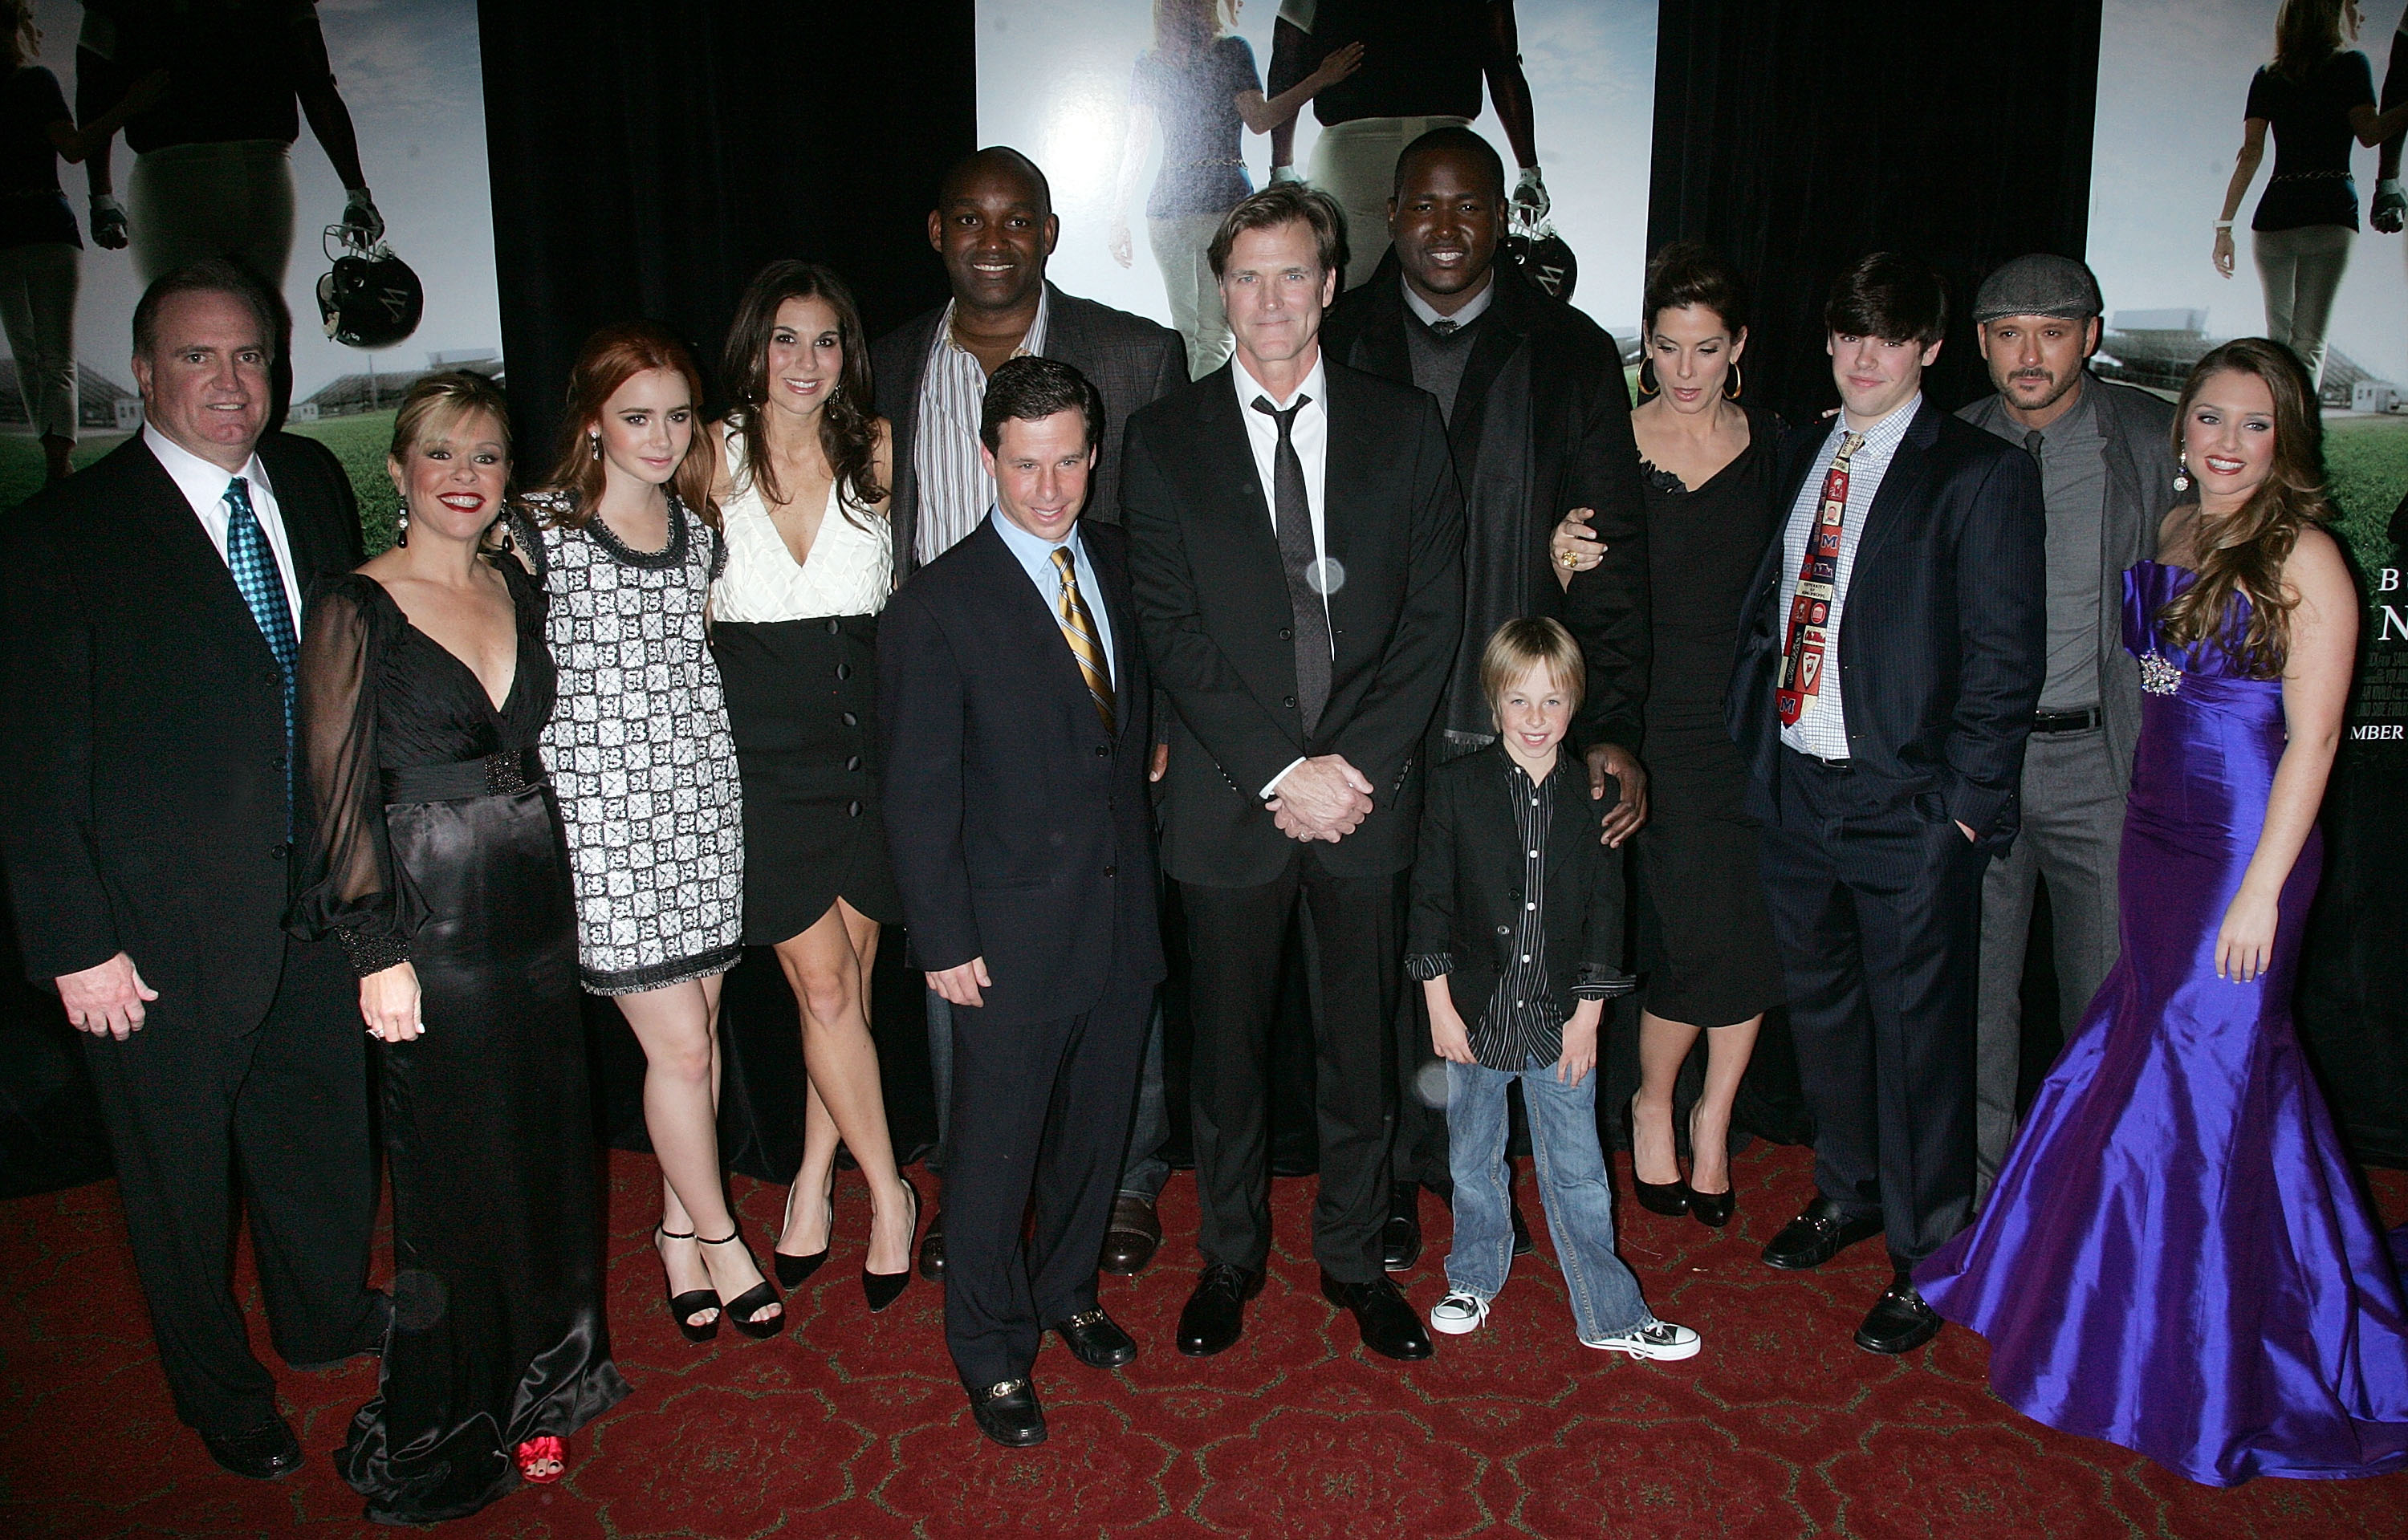 The Tuohys and some cast members of the Blind Side take a group photo